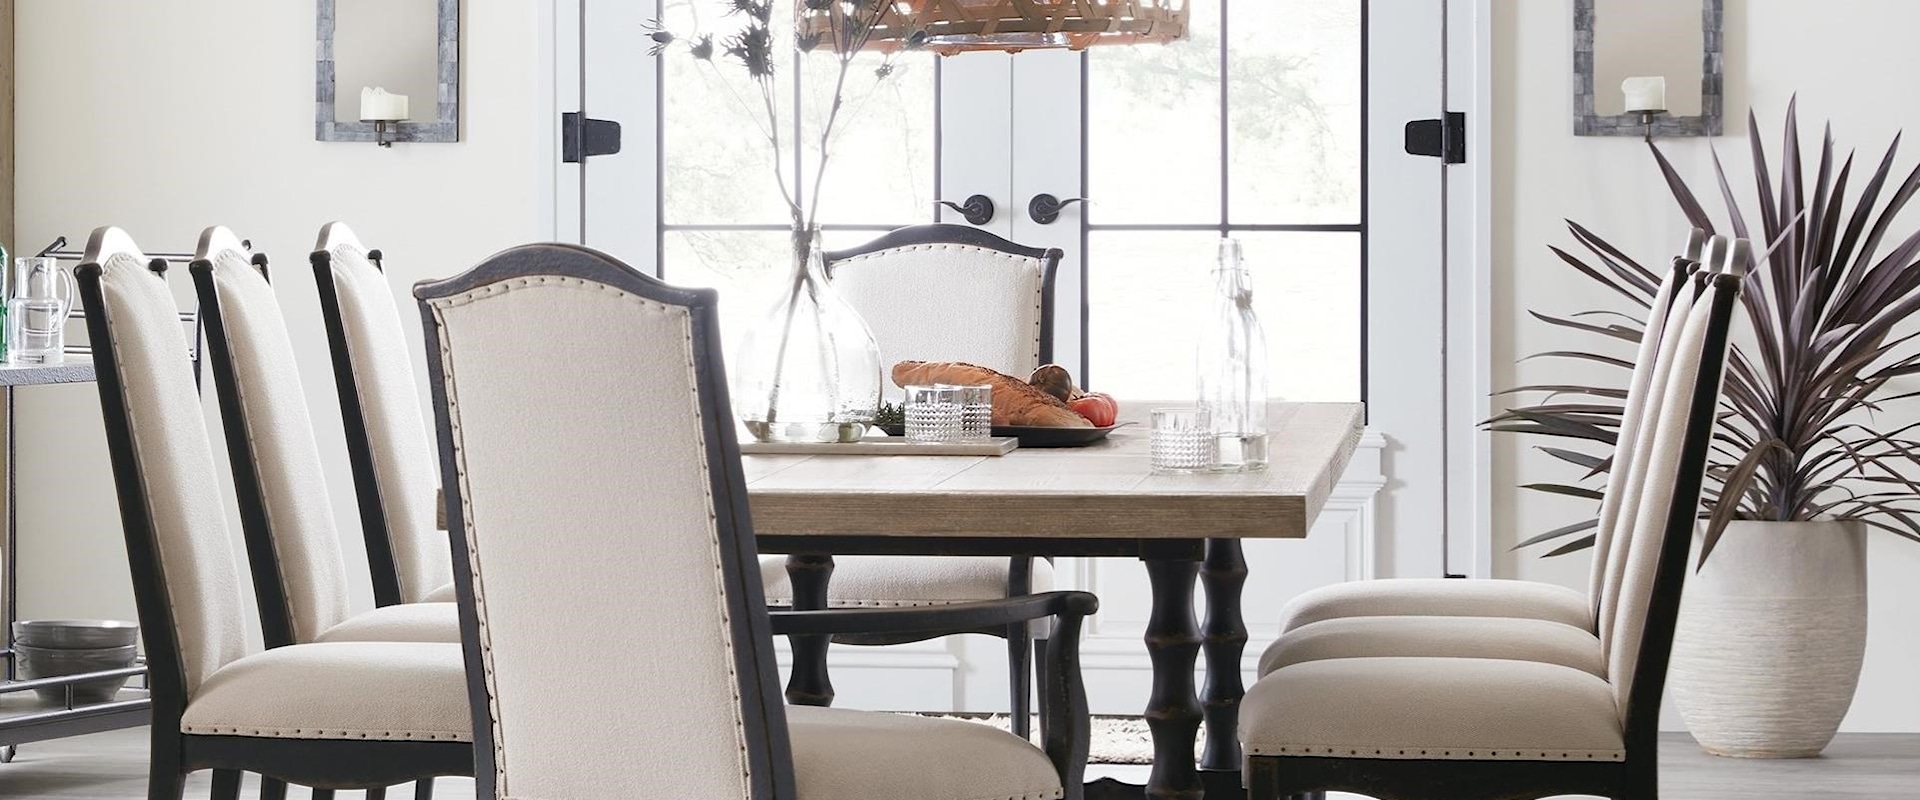 9-Piece Trestle Table and Chair Set